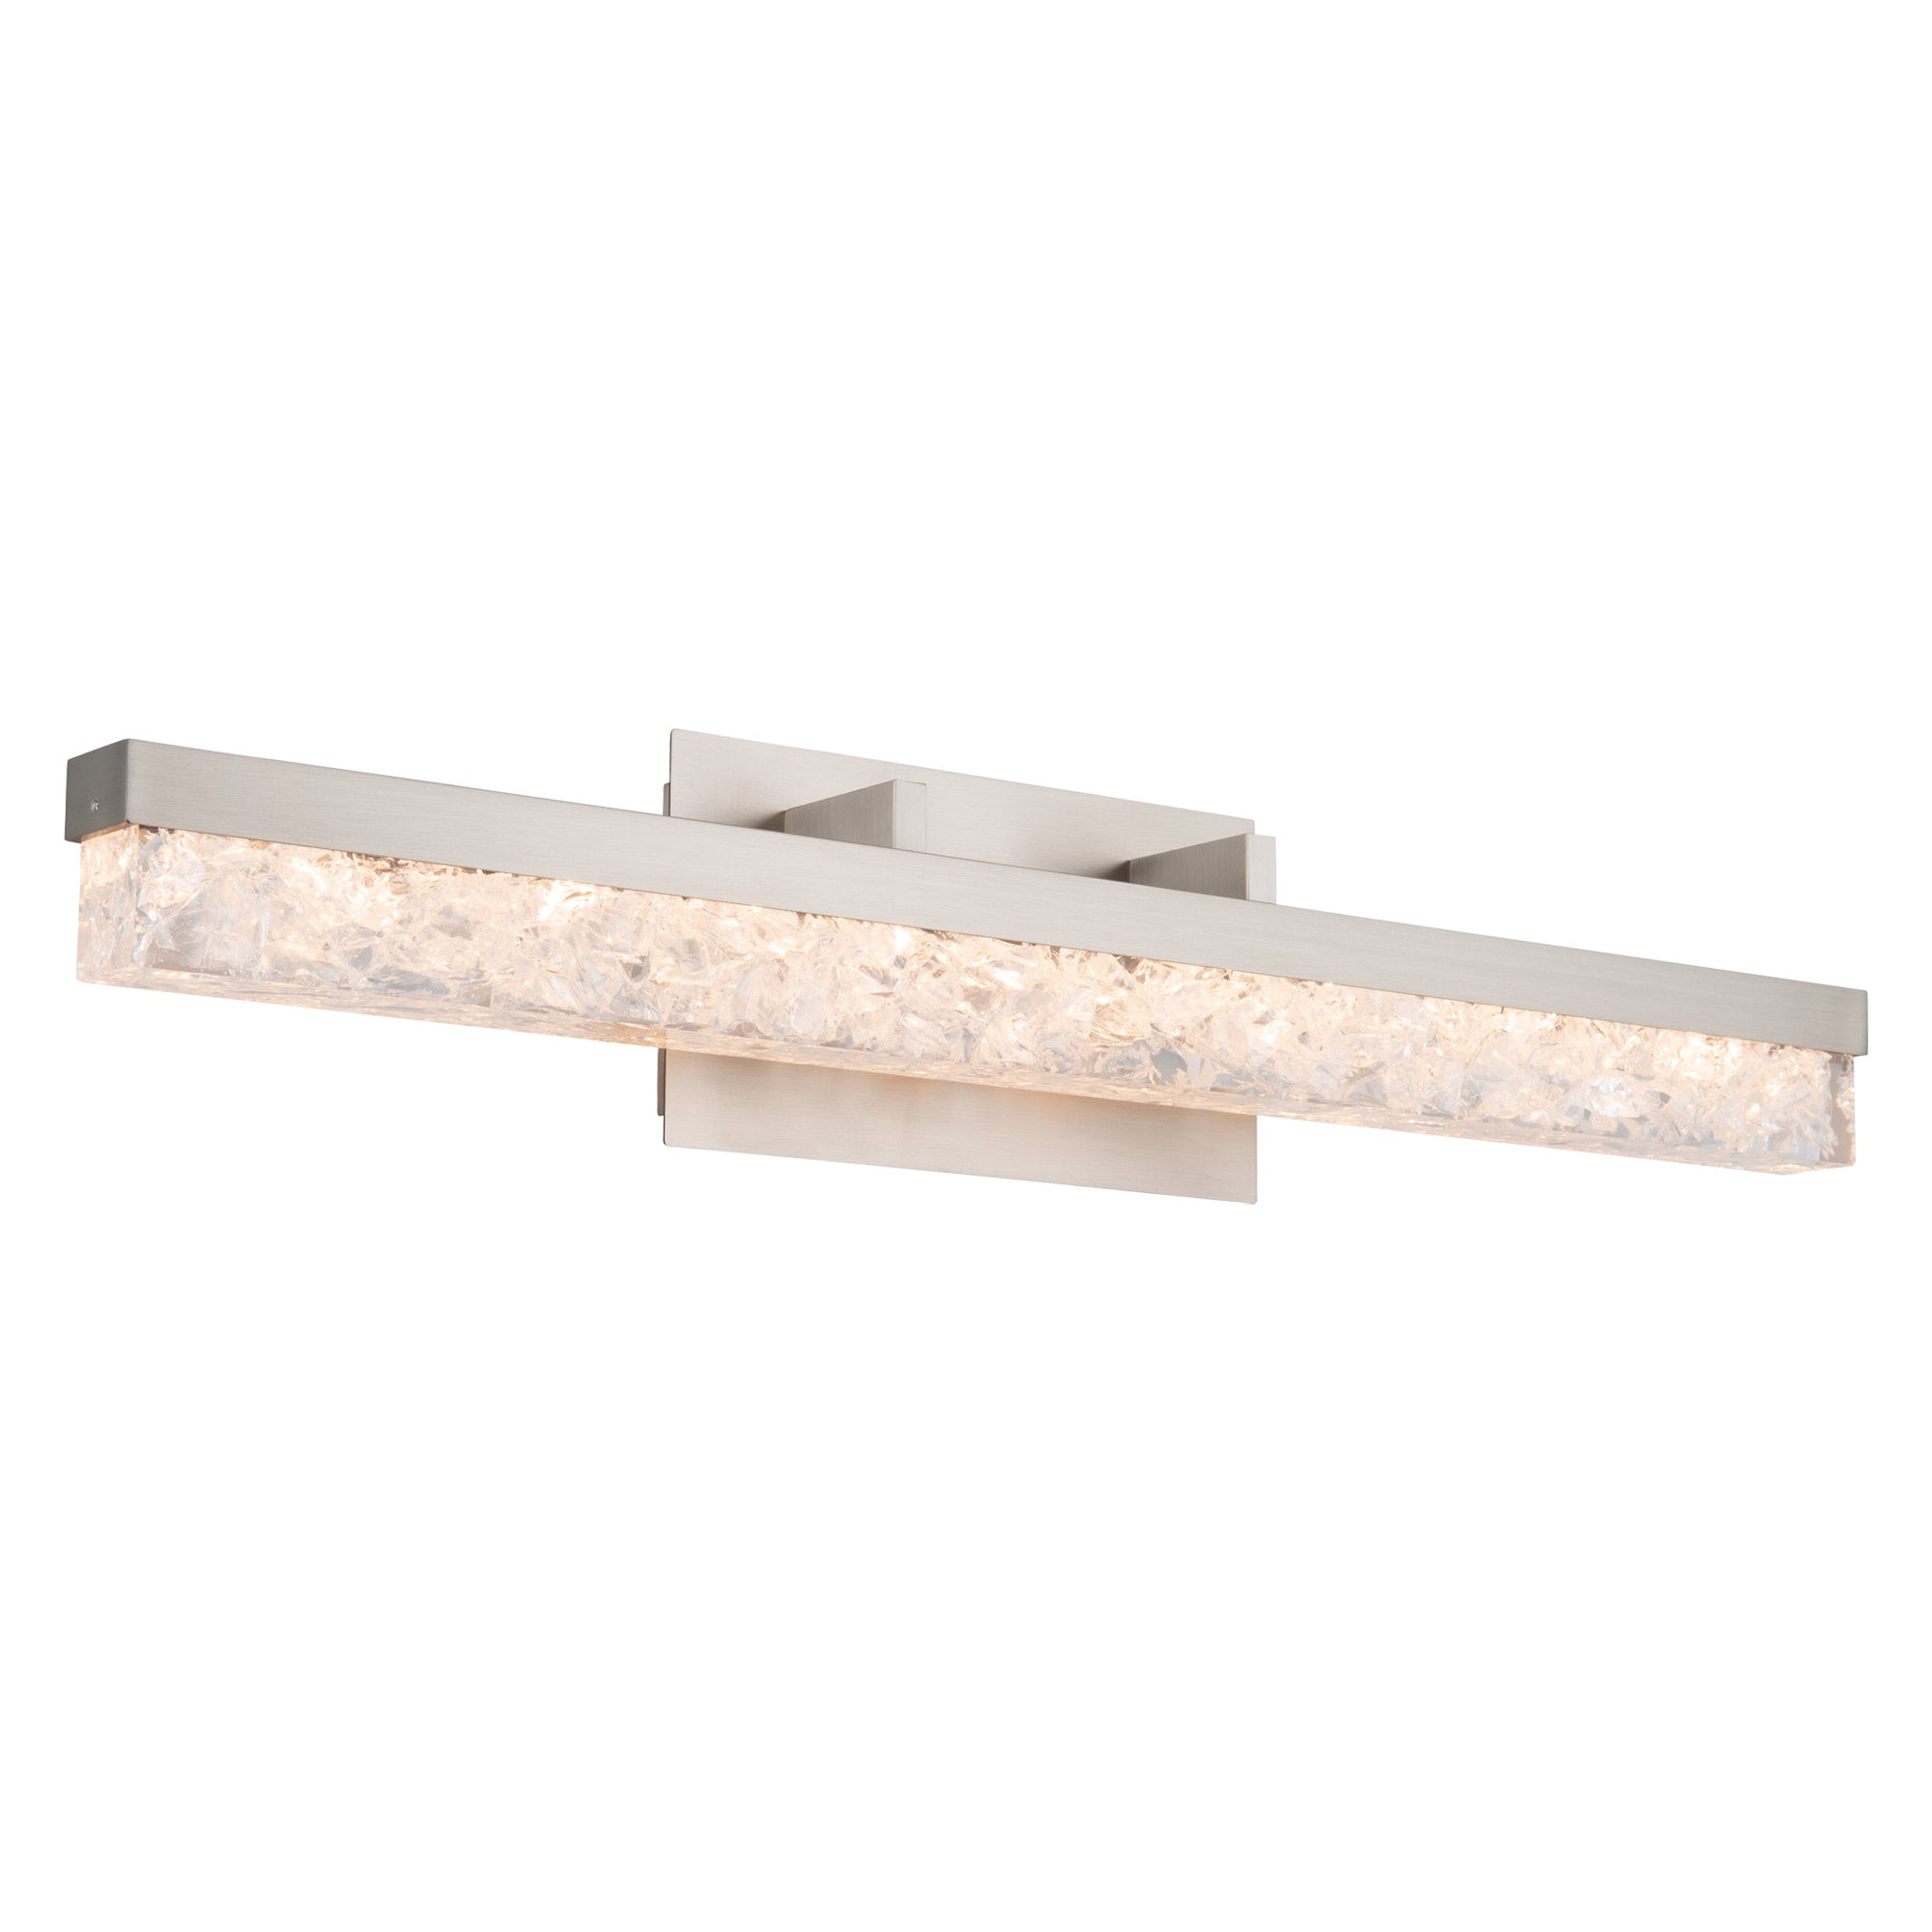 MINX Bathroom sconce Nickel INTEGRATED LED - WS-62029-BN | MODERN FORMS